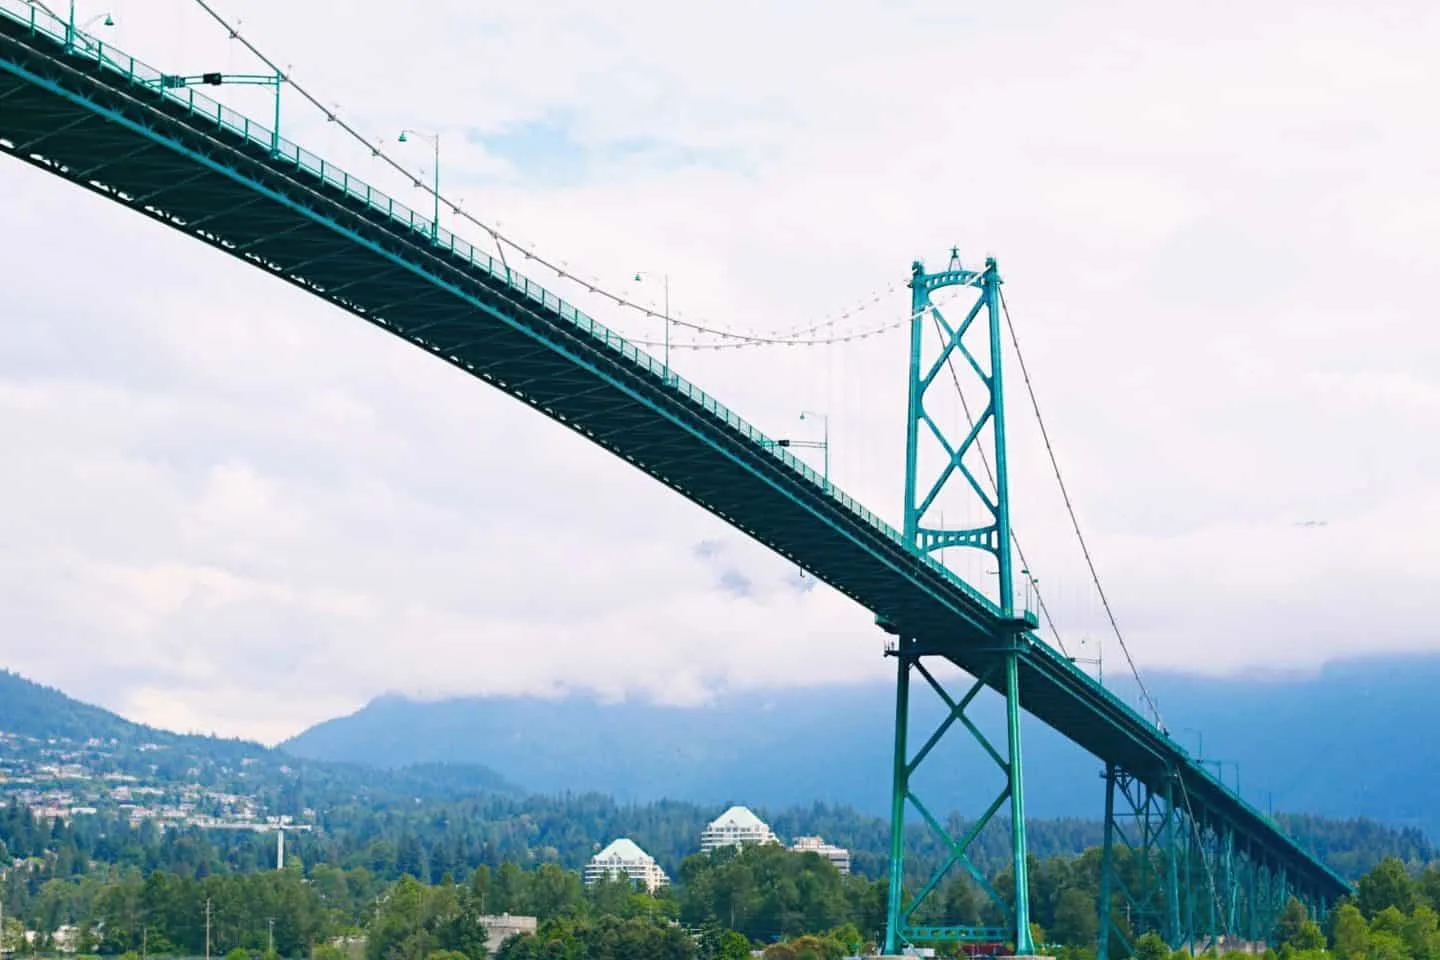 Lion's Gate Bridge from Stanley Park Seawall, Vancouver, British Columbia